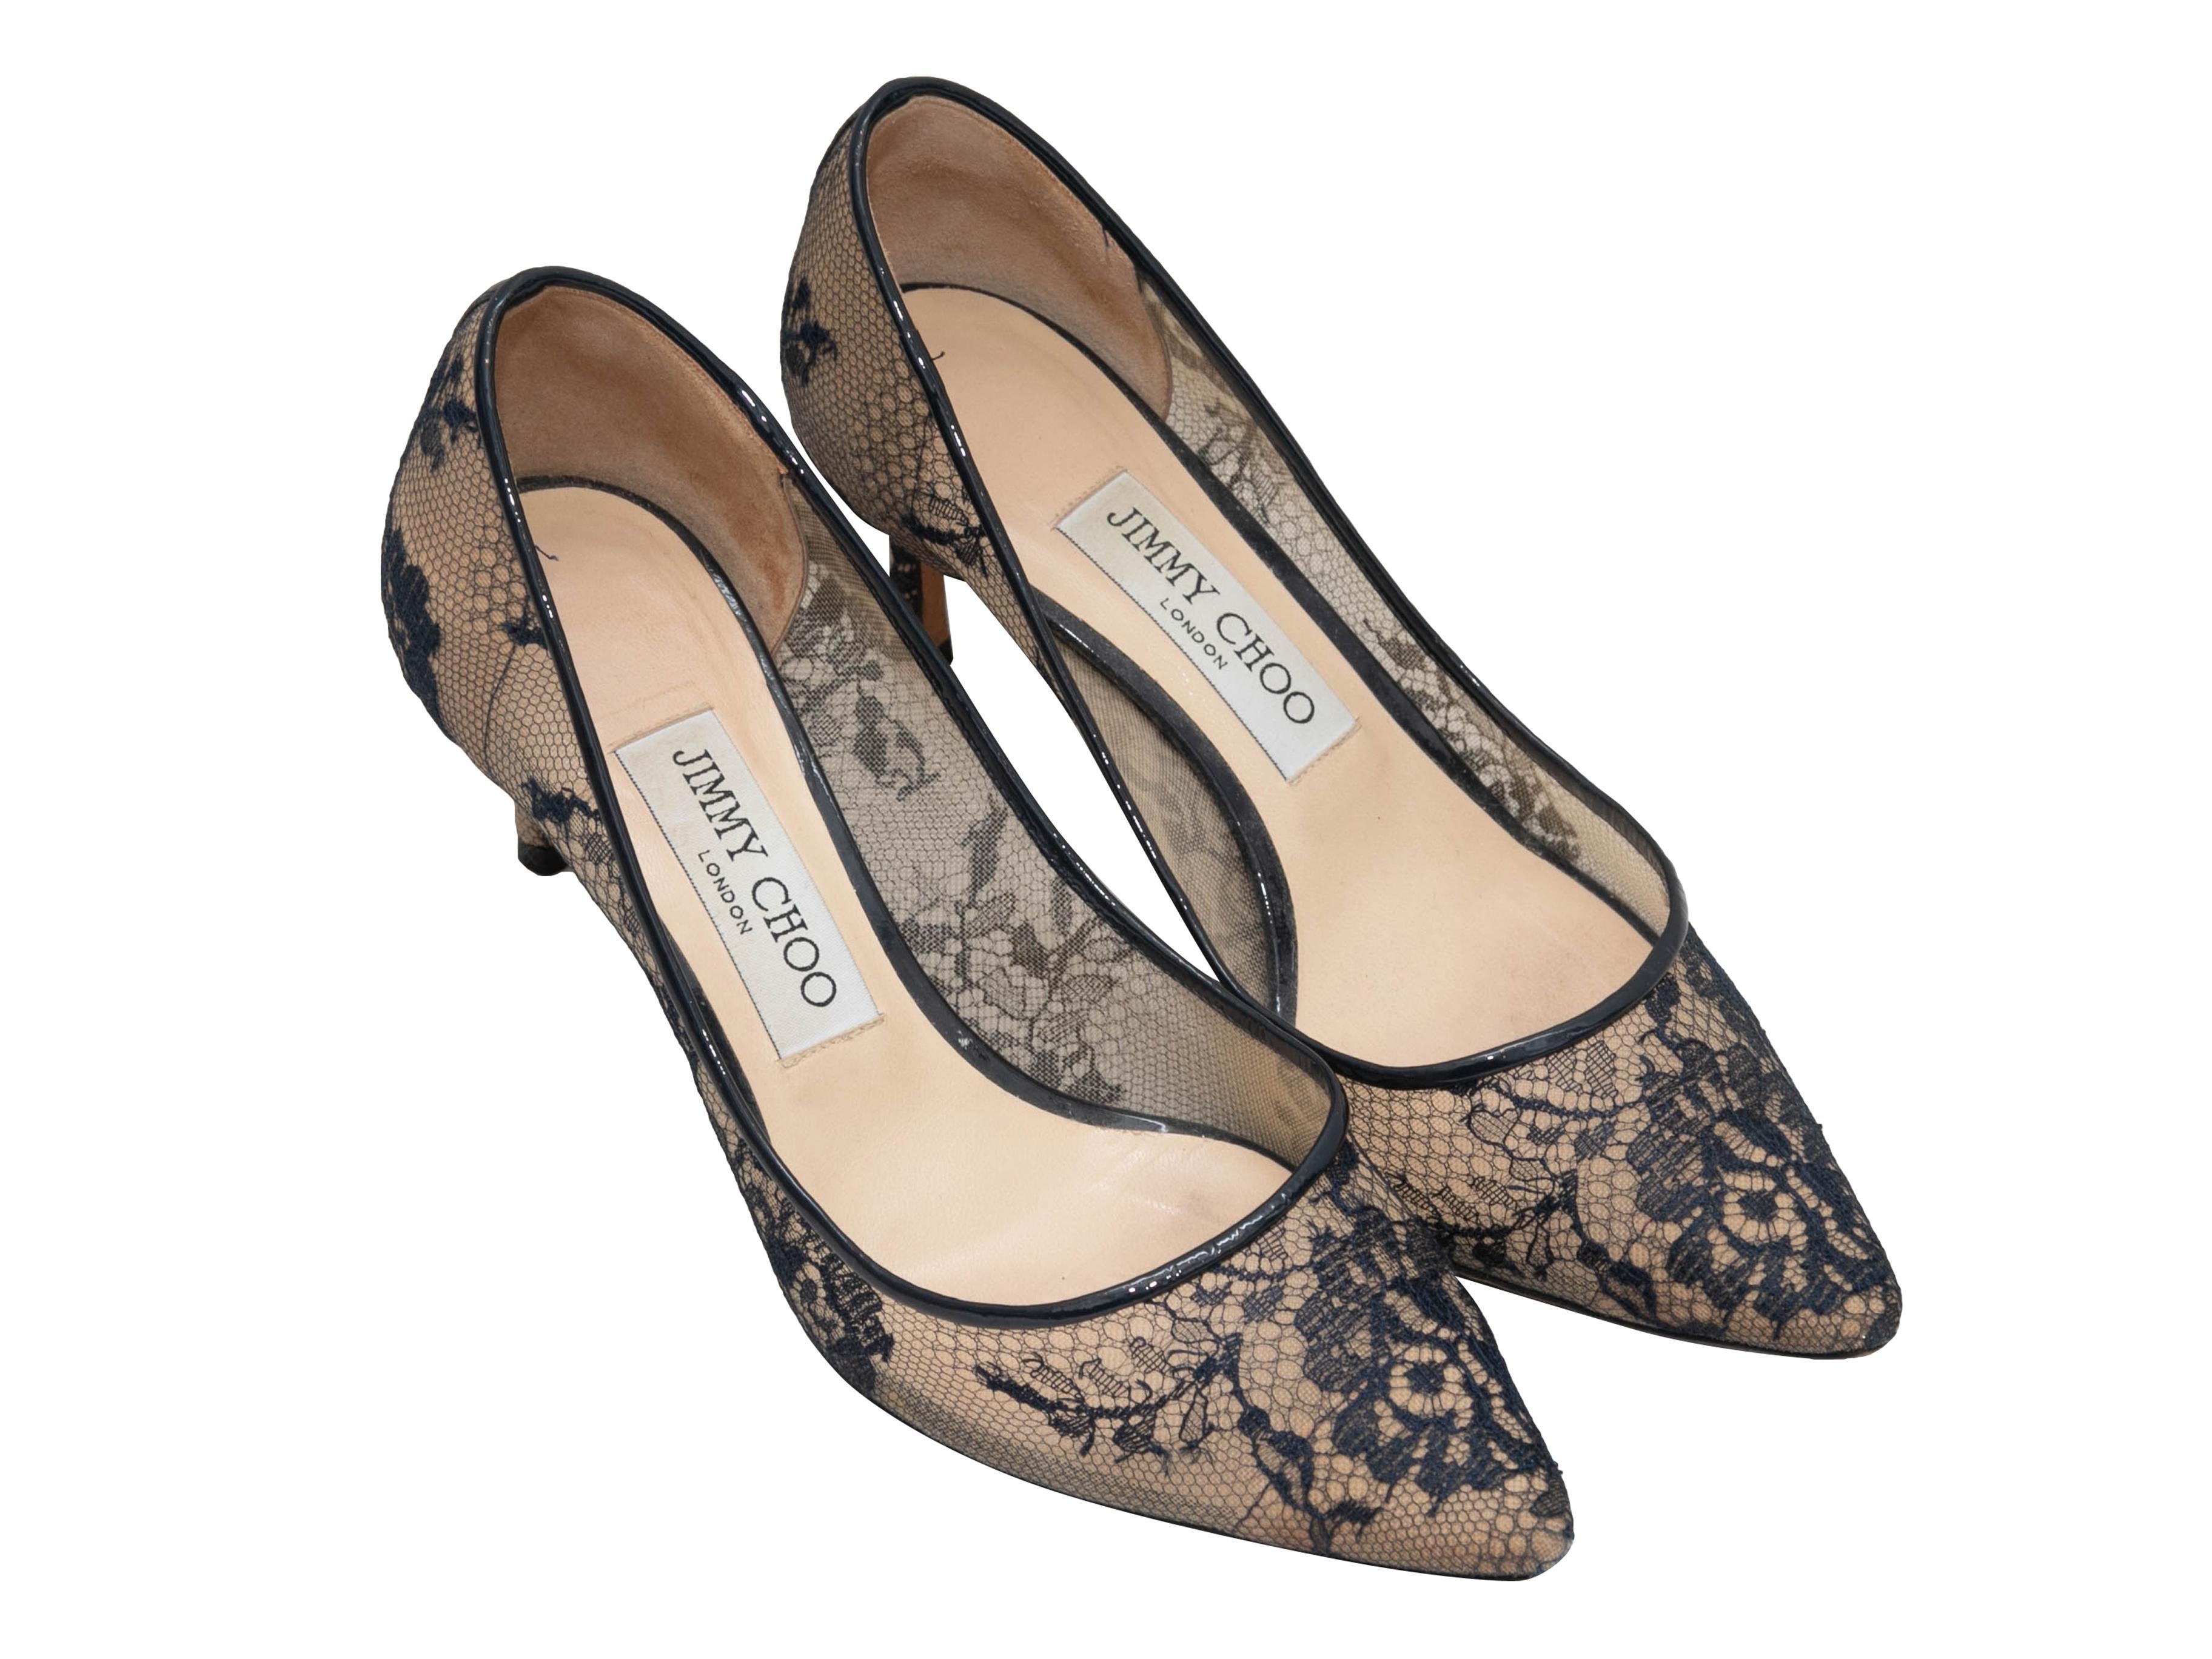 Navy & Beige Jimmy Choo Lace Pointed-Toe Pumps Size 36.5 In Good Condition For Sale In New York, NY